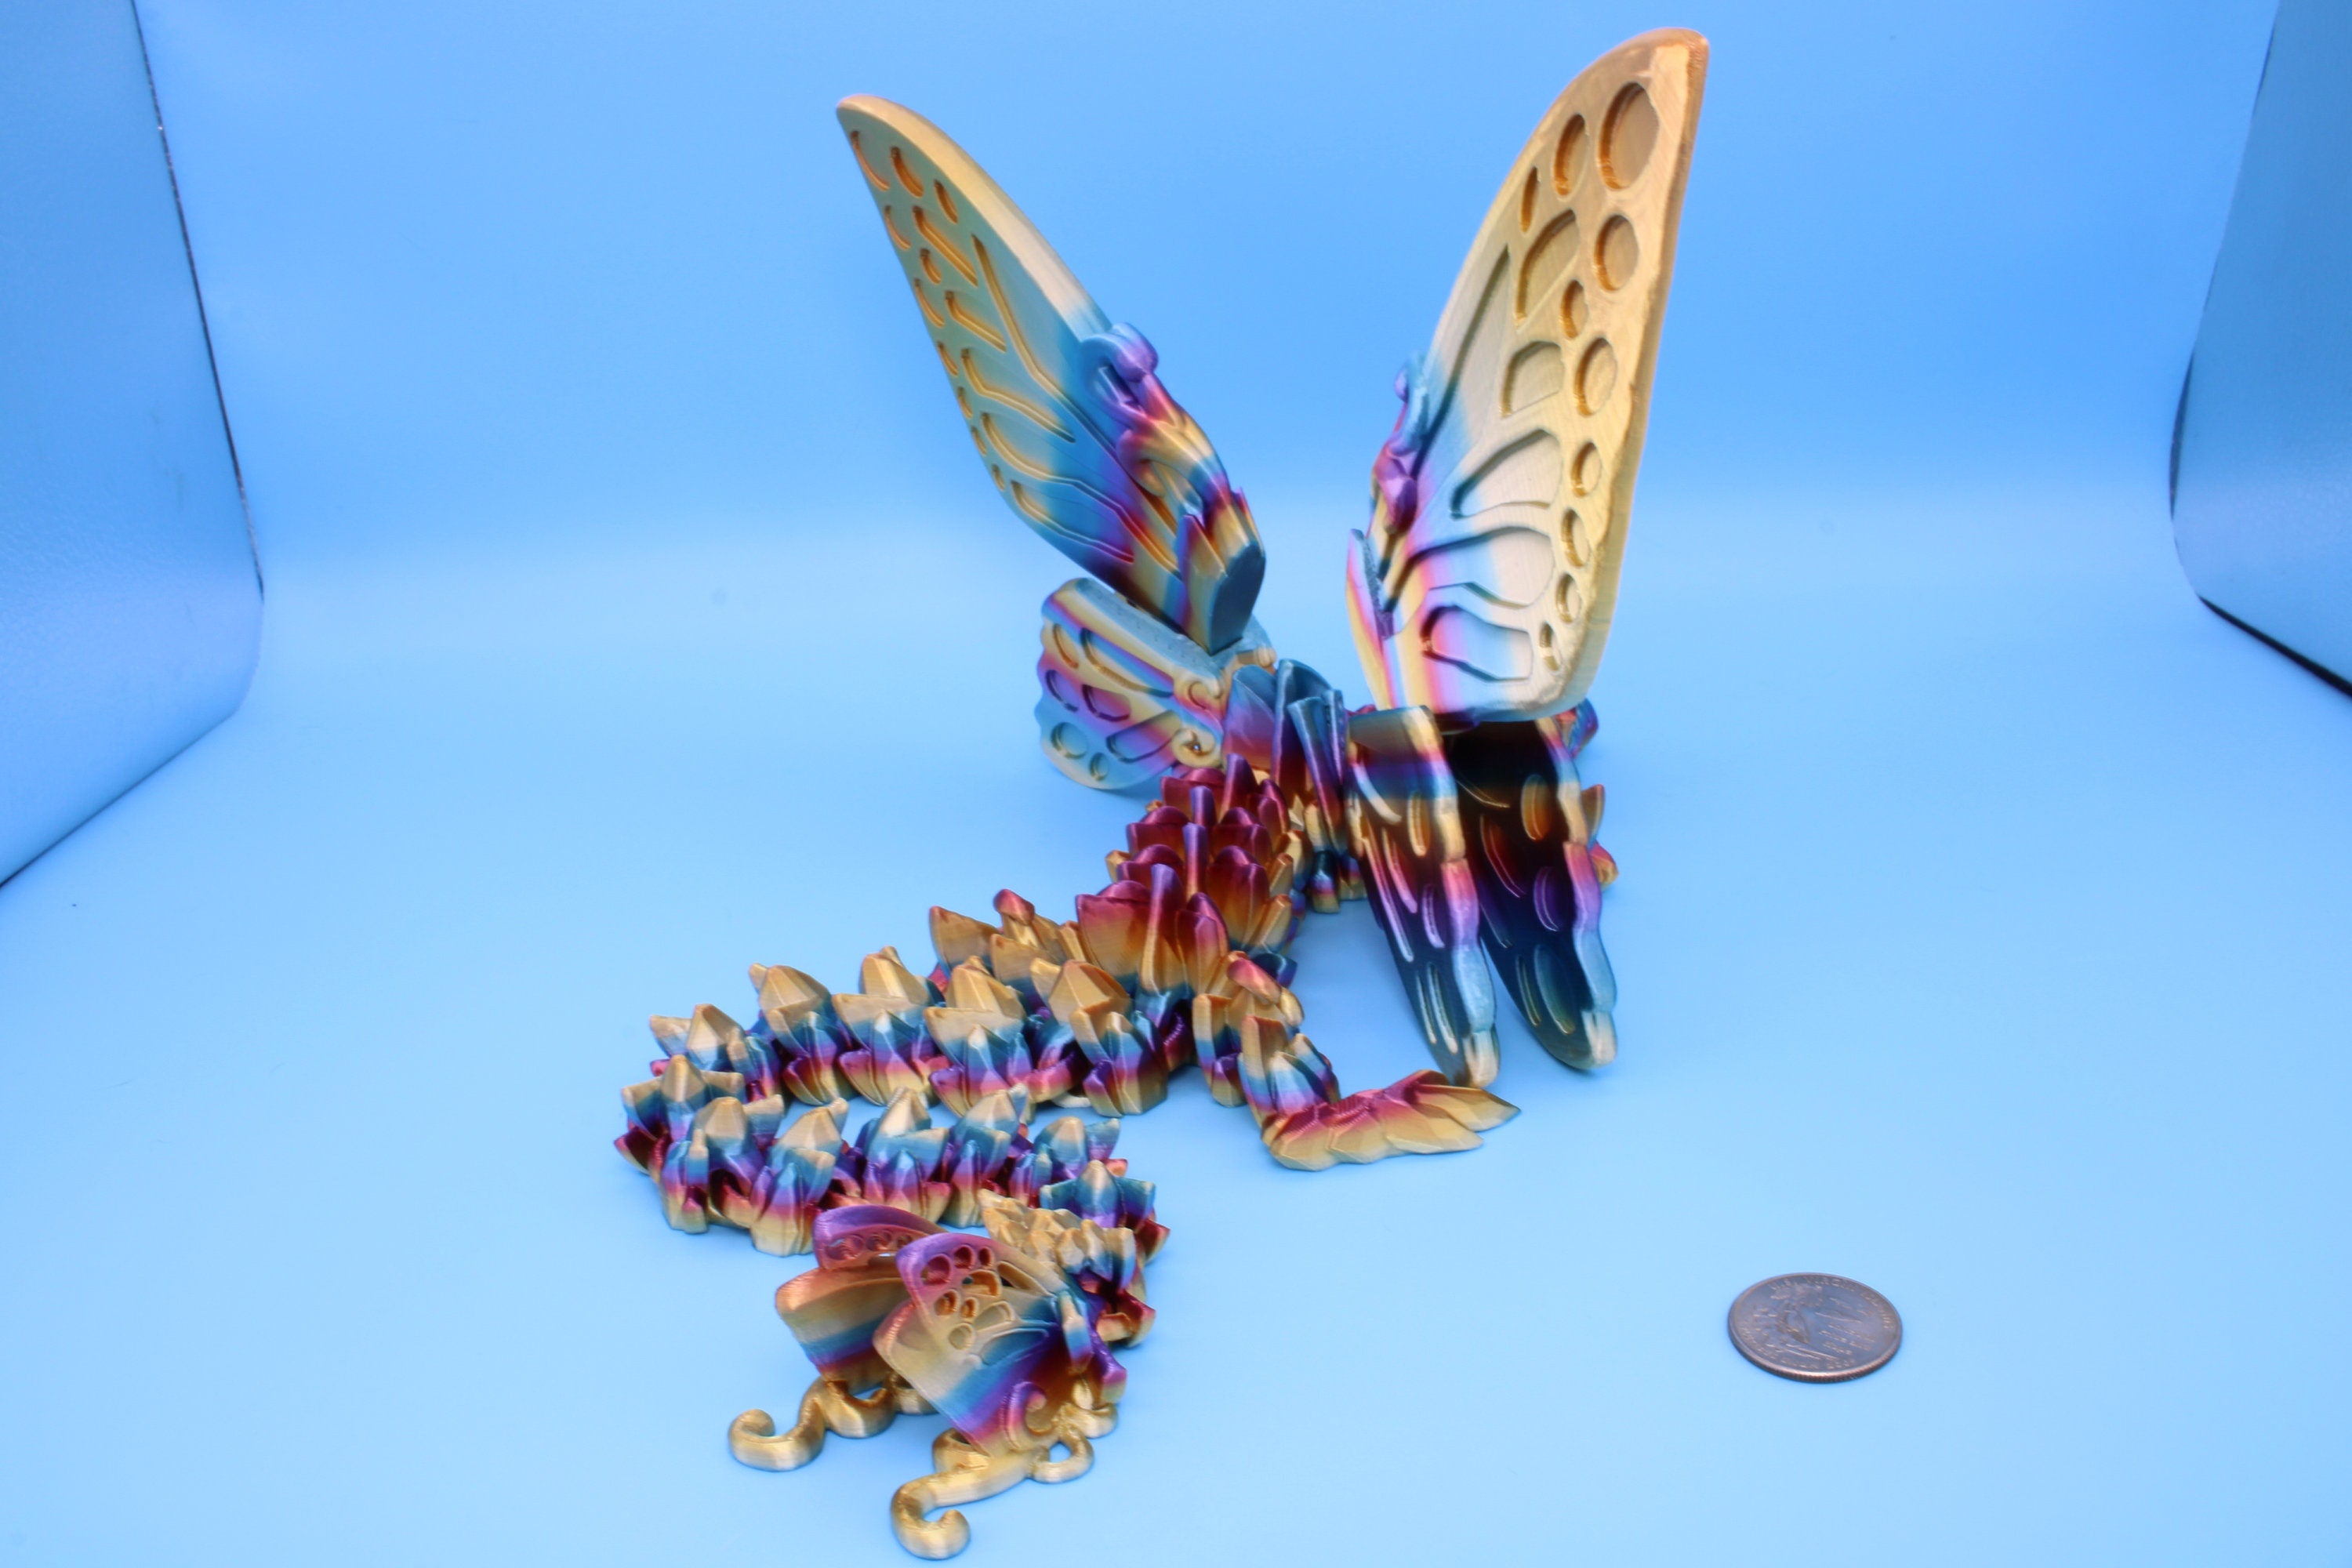 Butterfly Wing Dragon | 3D Printed Articulating Dragon 18 in.